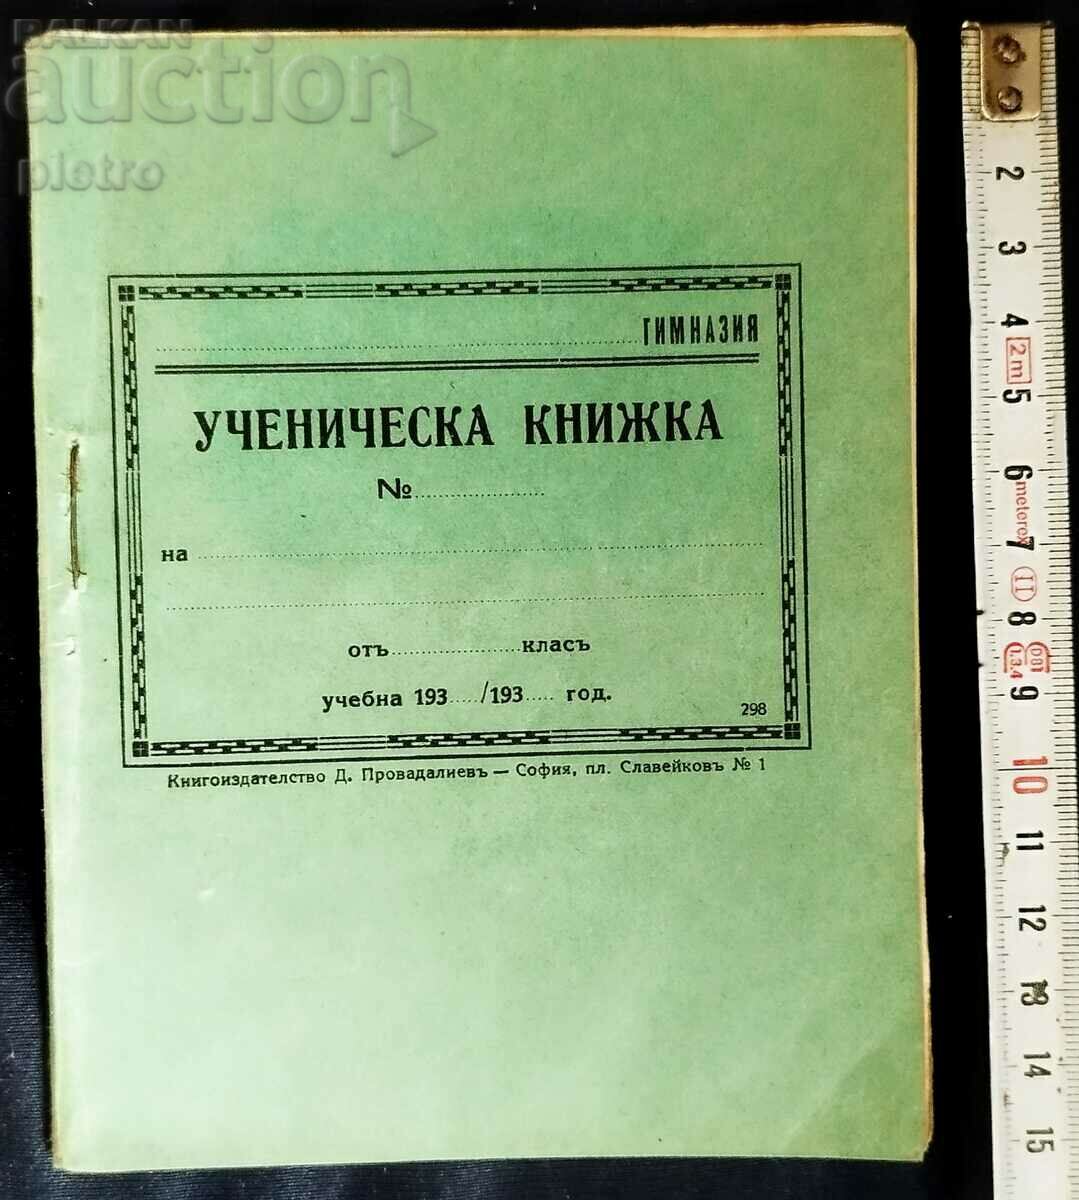 Kingdom of Bulgaria Document HIGH SCHOOL BOOKLET No. 4/ FOR SUCCESS, ..